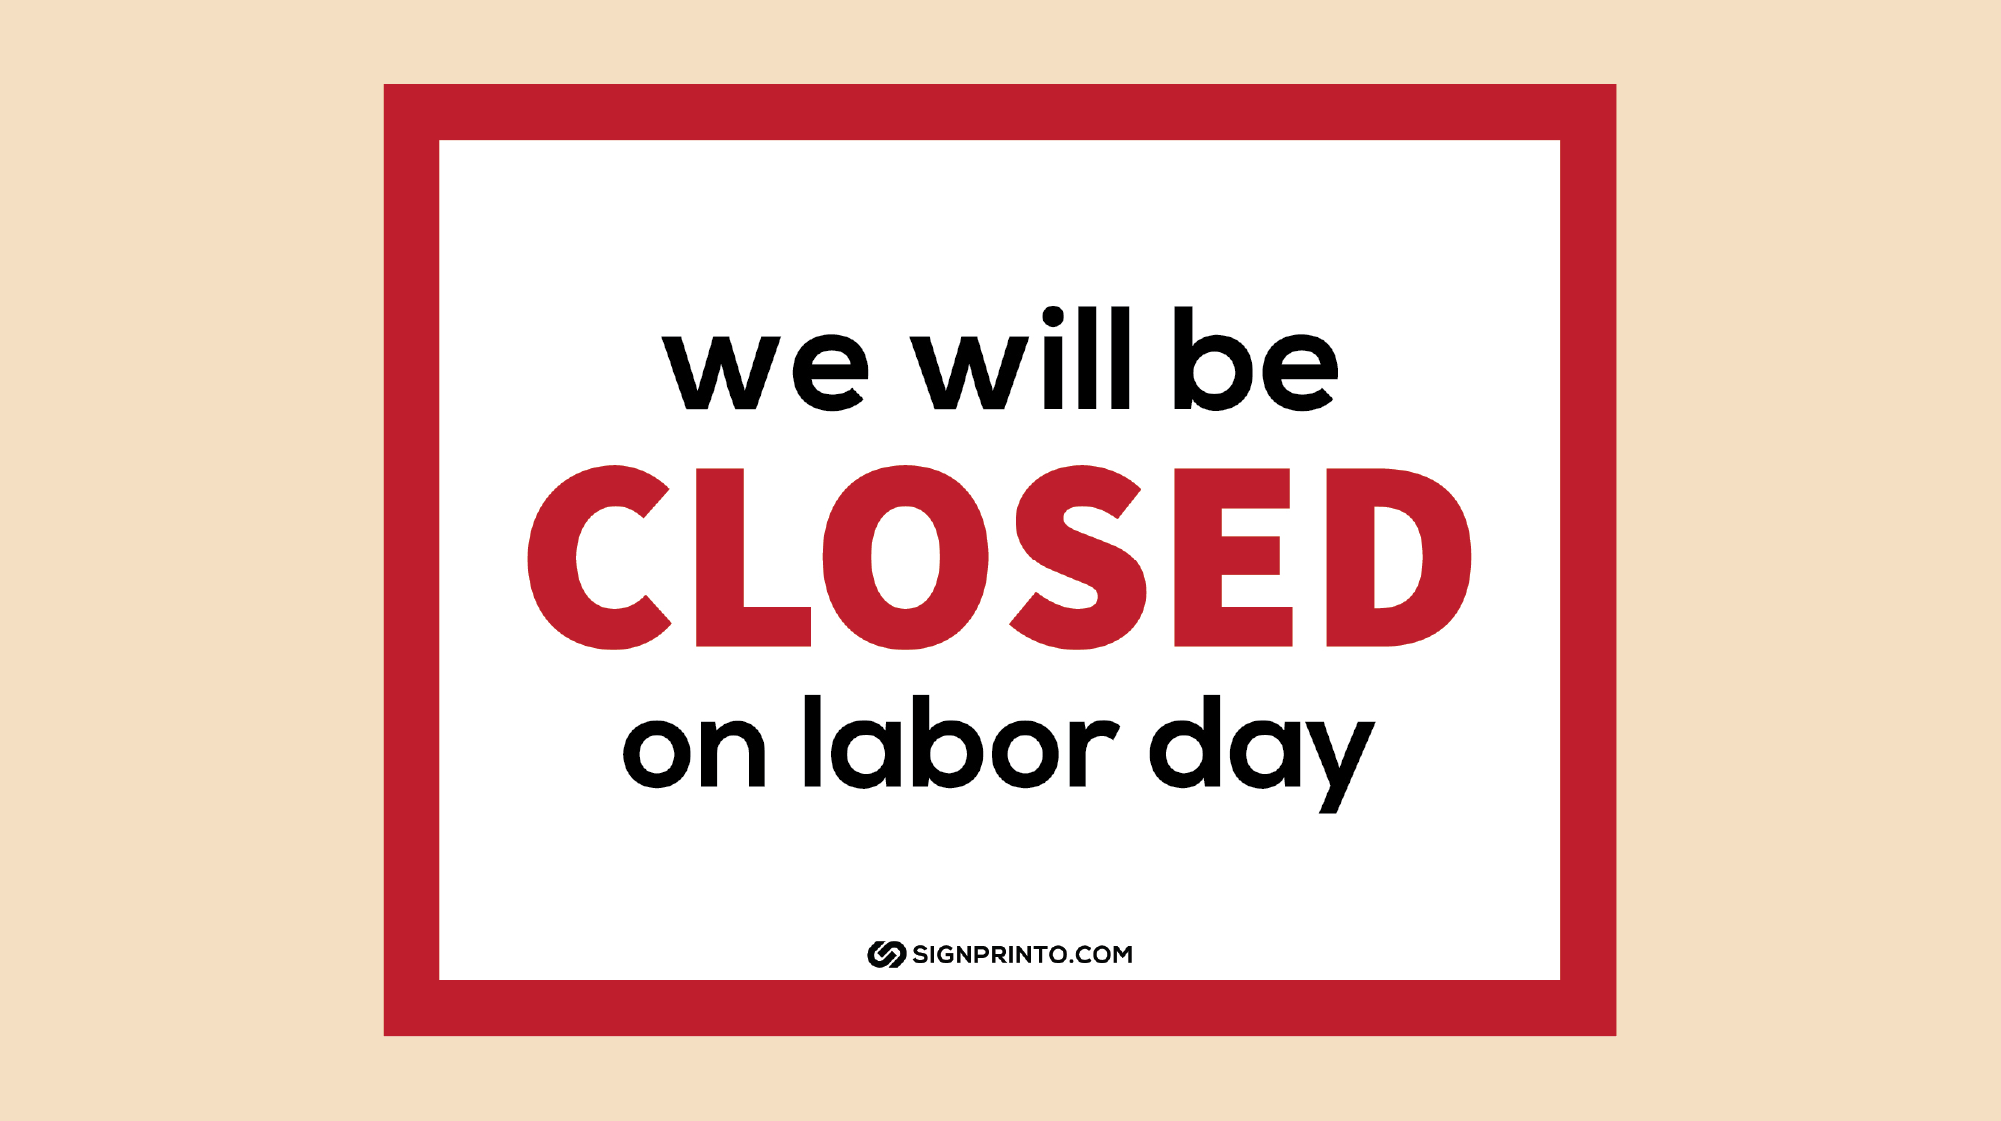 We Will be closed on labour day - Labor Day closed sign